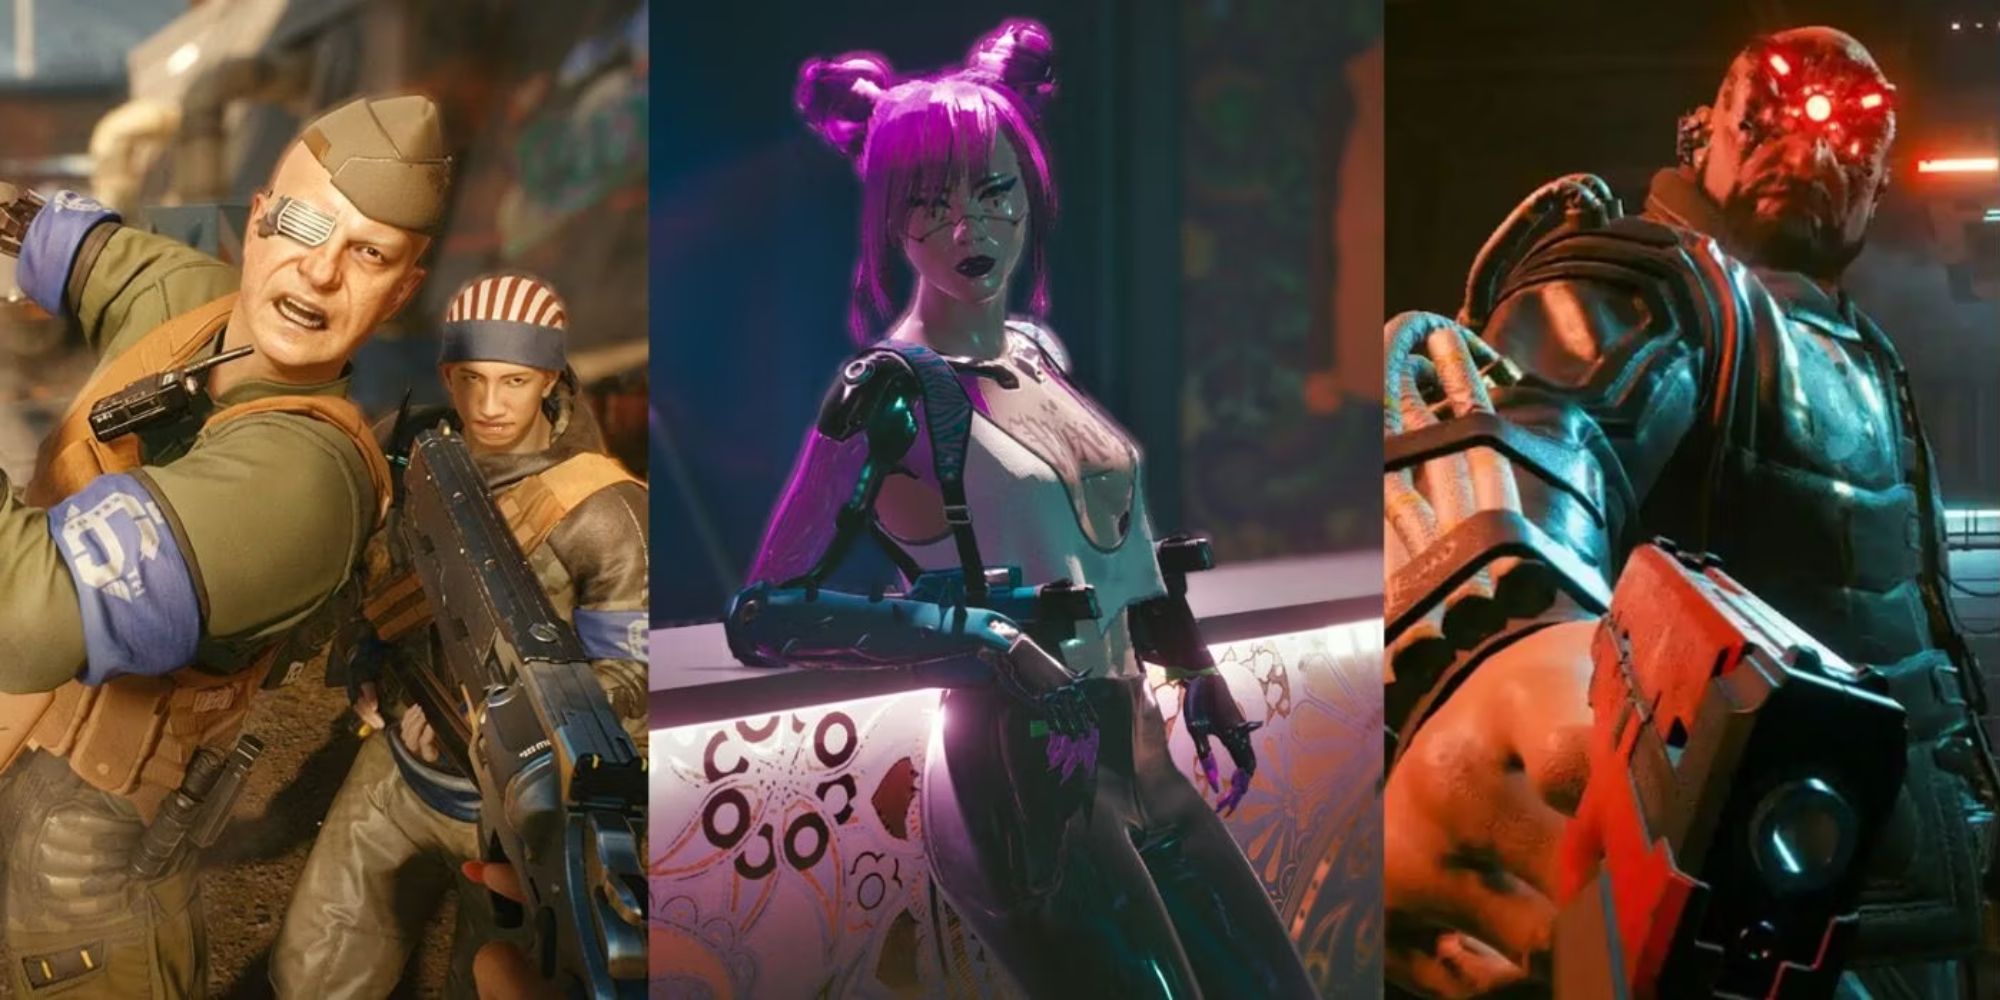 Three images of gang members from Cyberpunk 2077